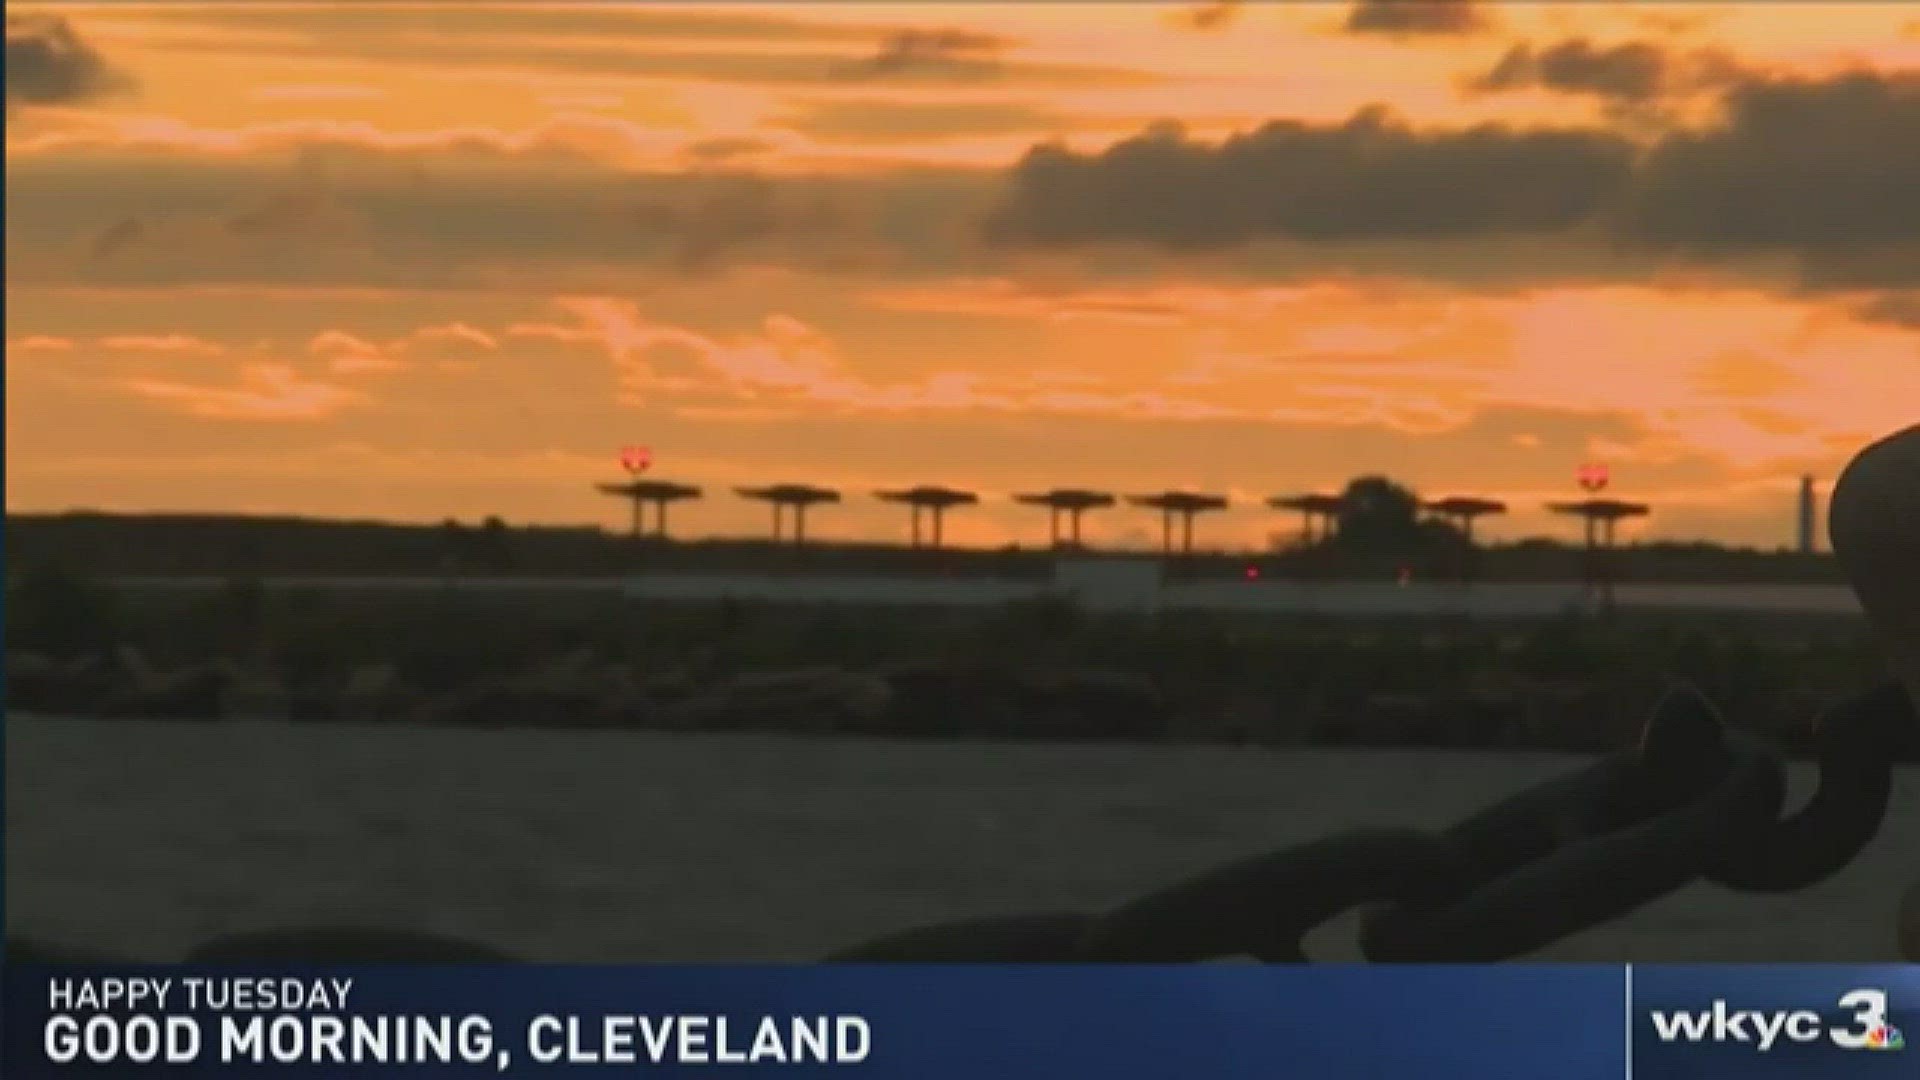 Check out this stunning sunrise over Lake Erie.